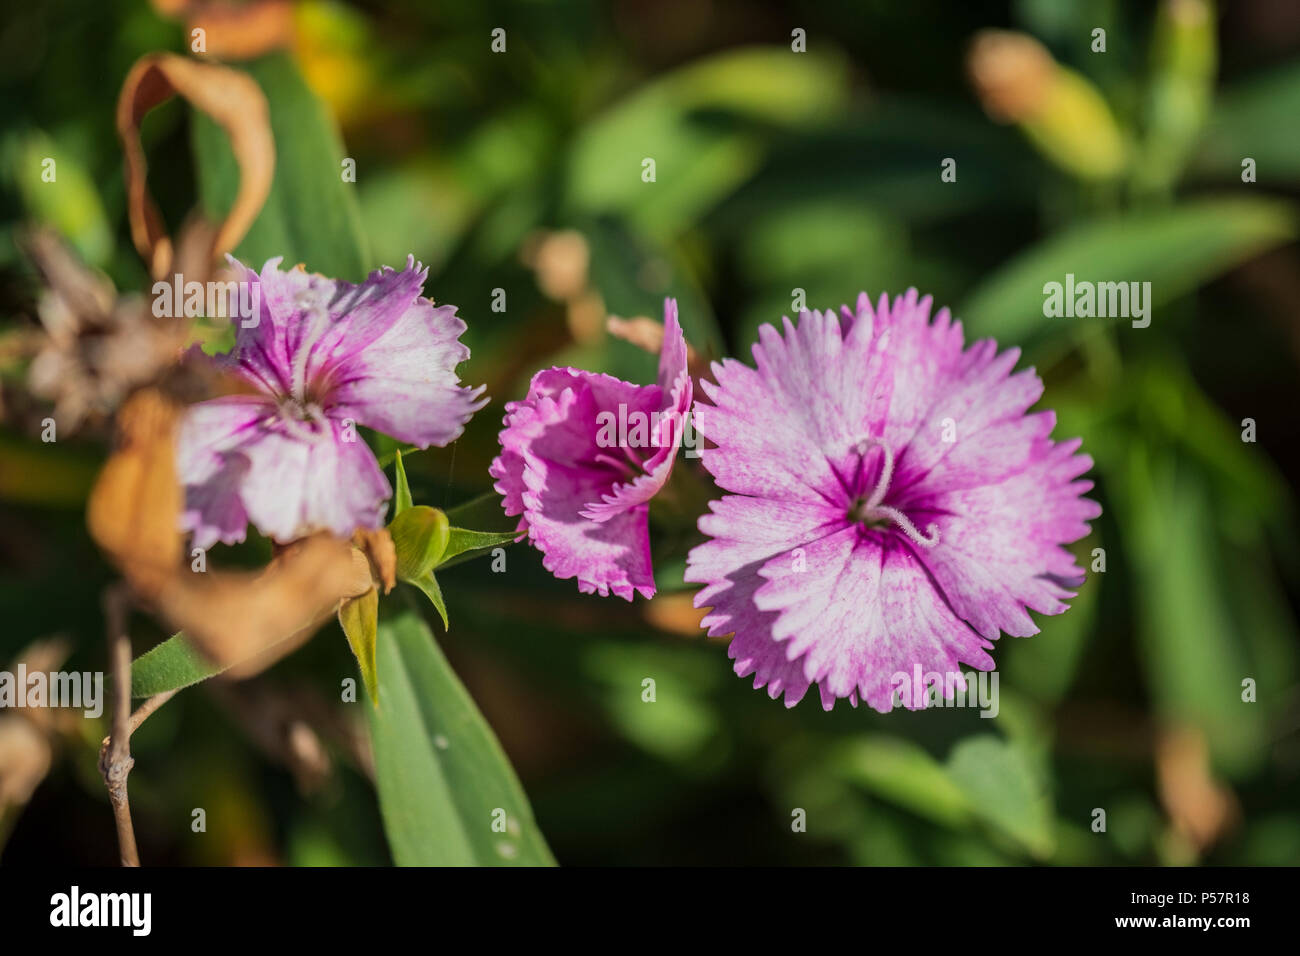 Pink dianthus flowers growing in Oklahoma, USA. Stock Photo